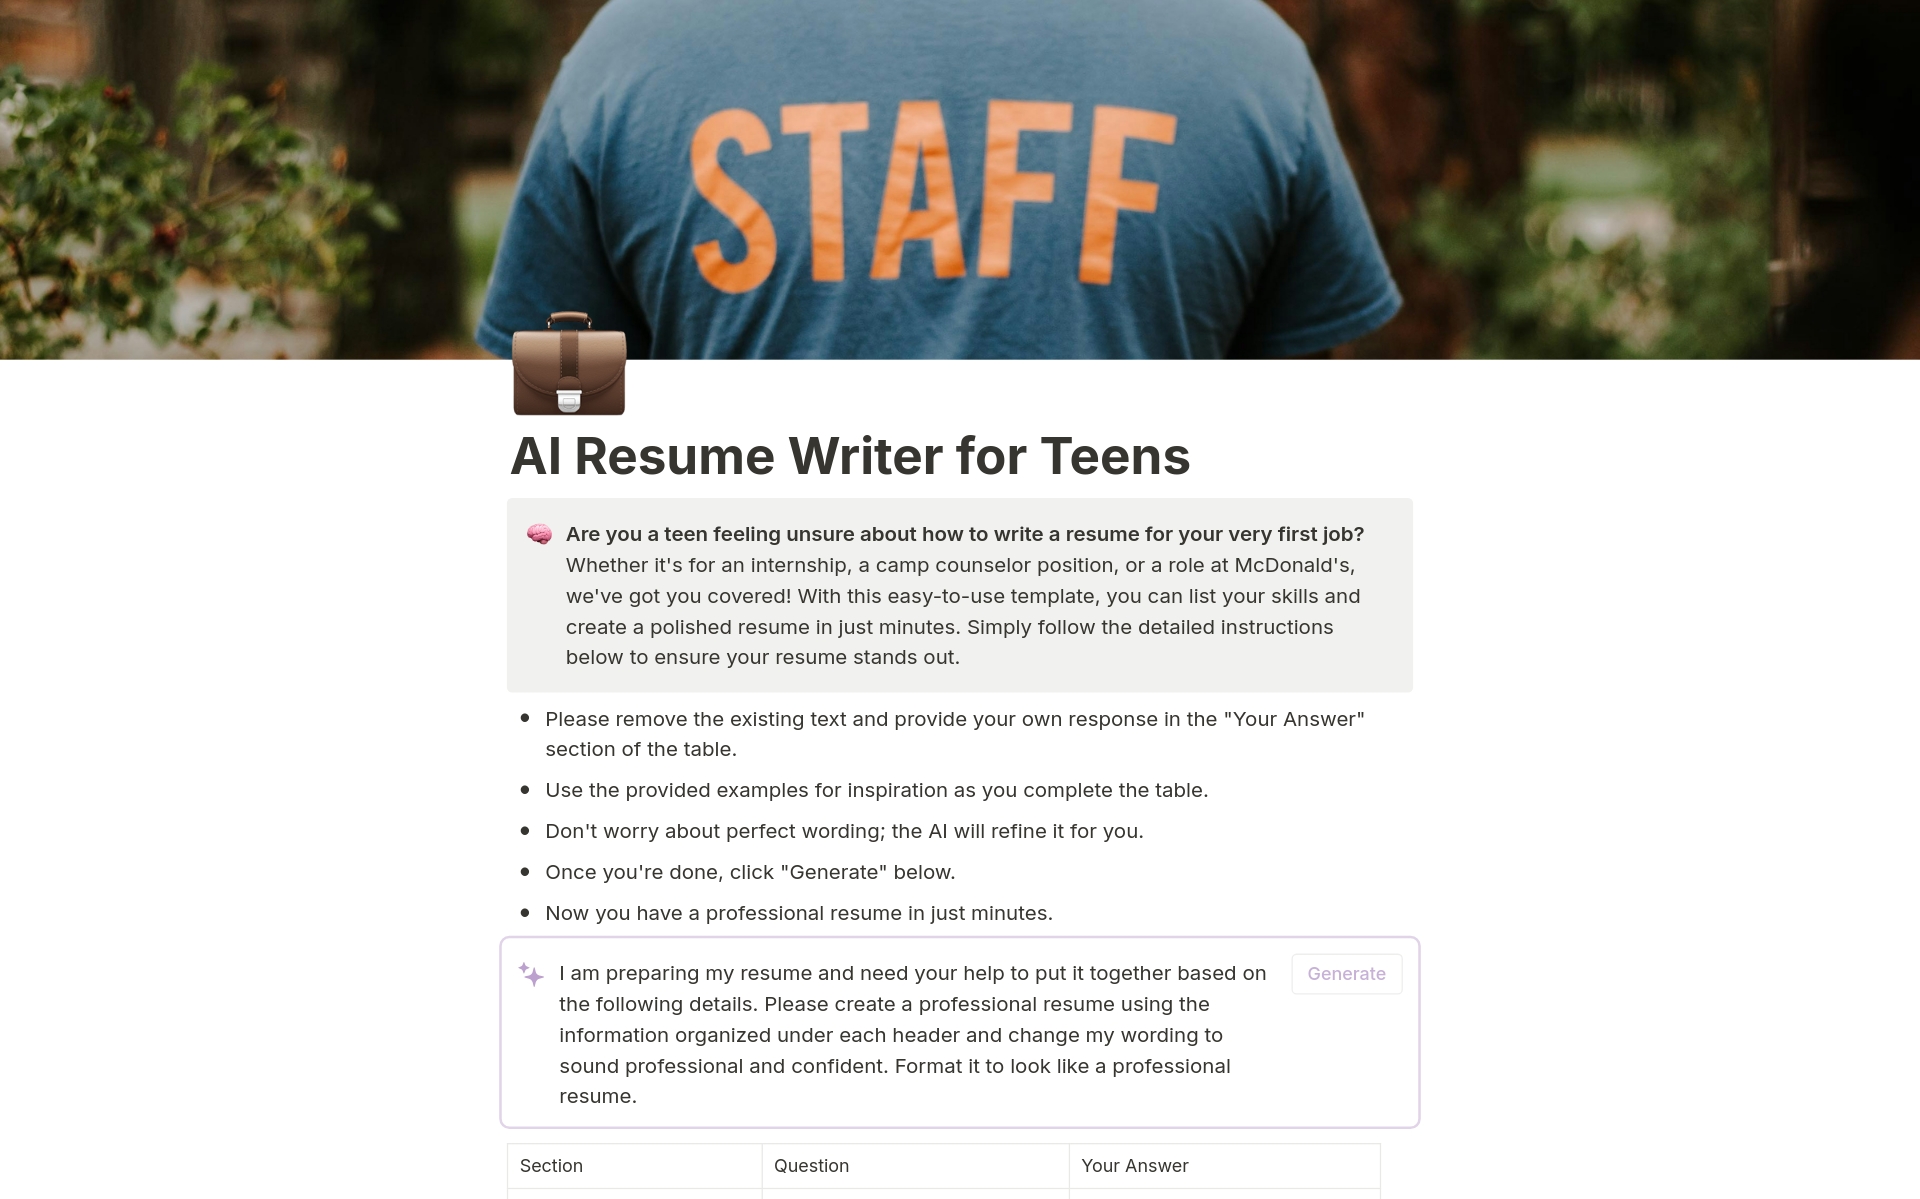 If you're a teen applying for a job, and you need to write a resume, but you get discouraged because you have no idea where to start? My AI Resume Writer for Teens will help you write and format a professional resume in minutes completely free. 